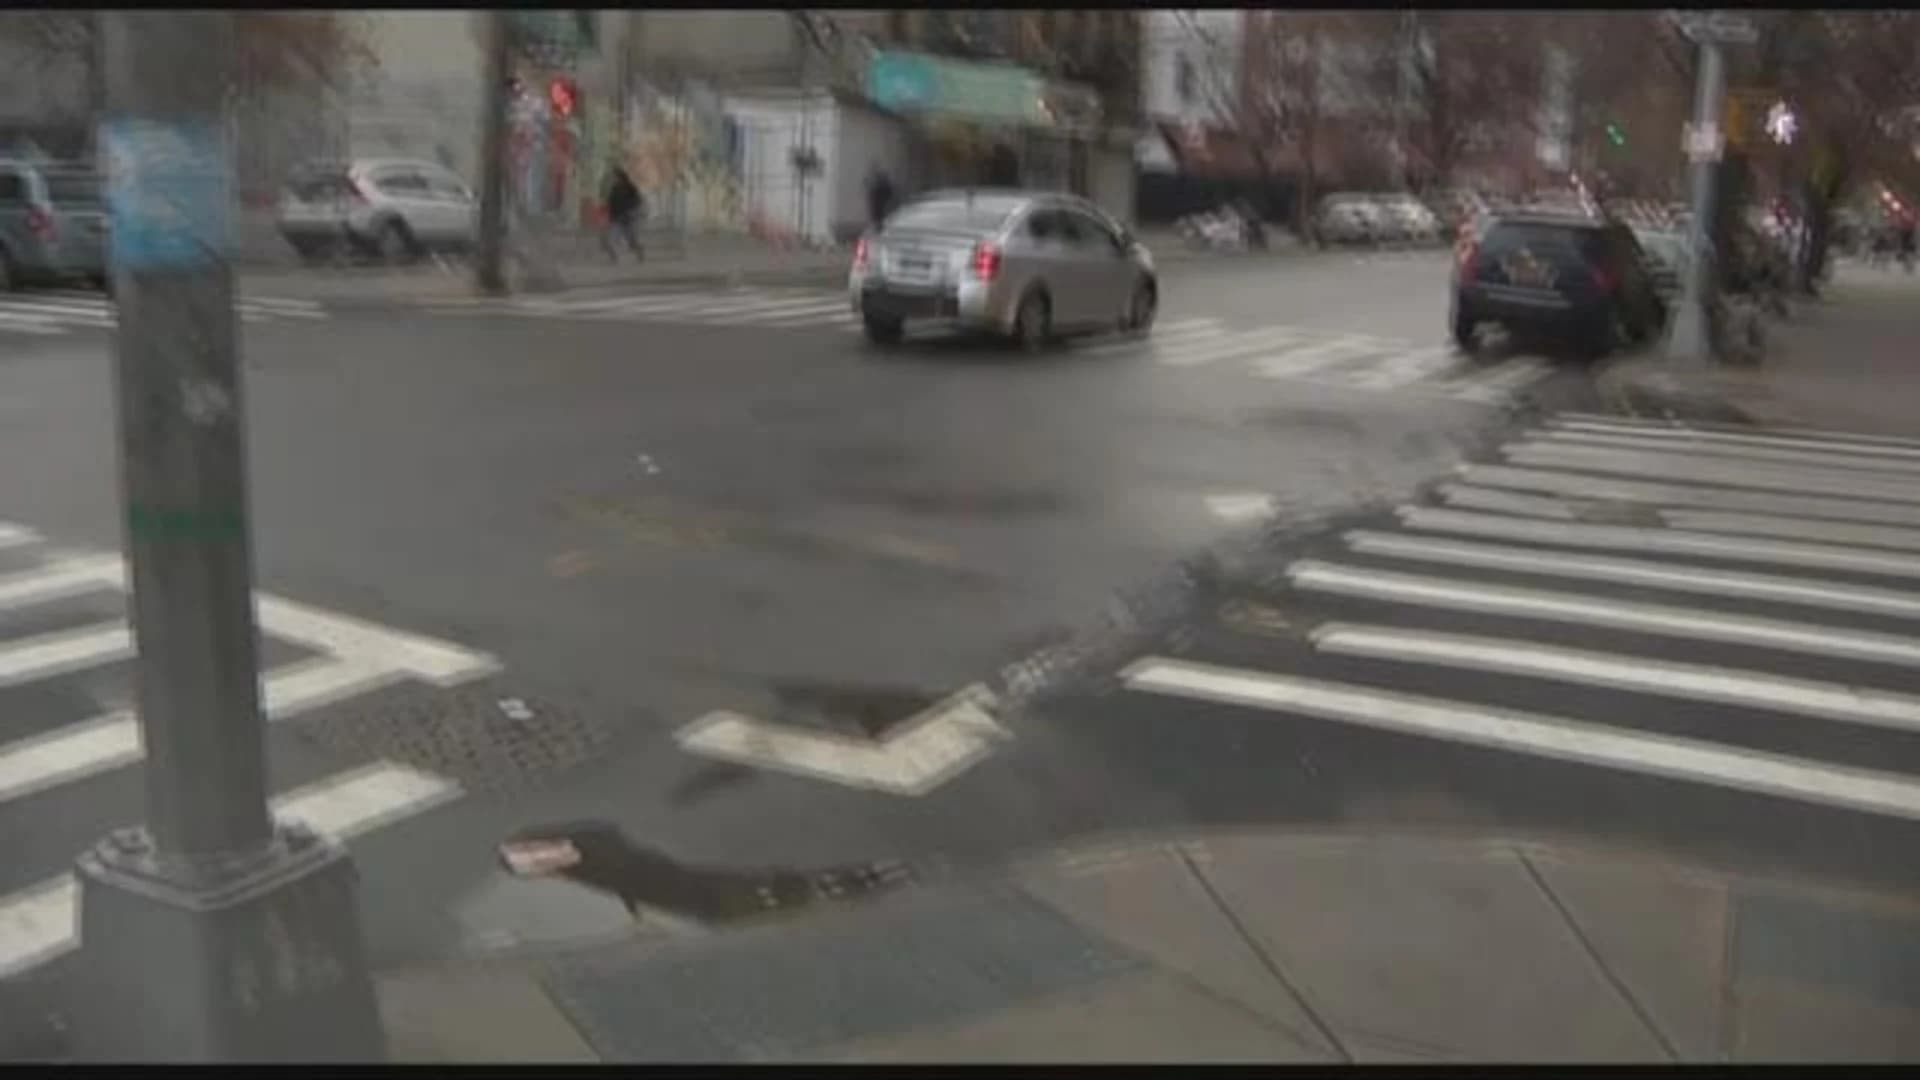 Woman with disabilities slashed in the Bronx